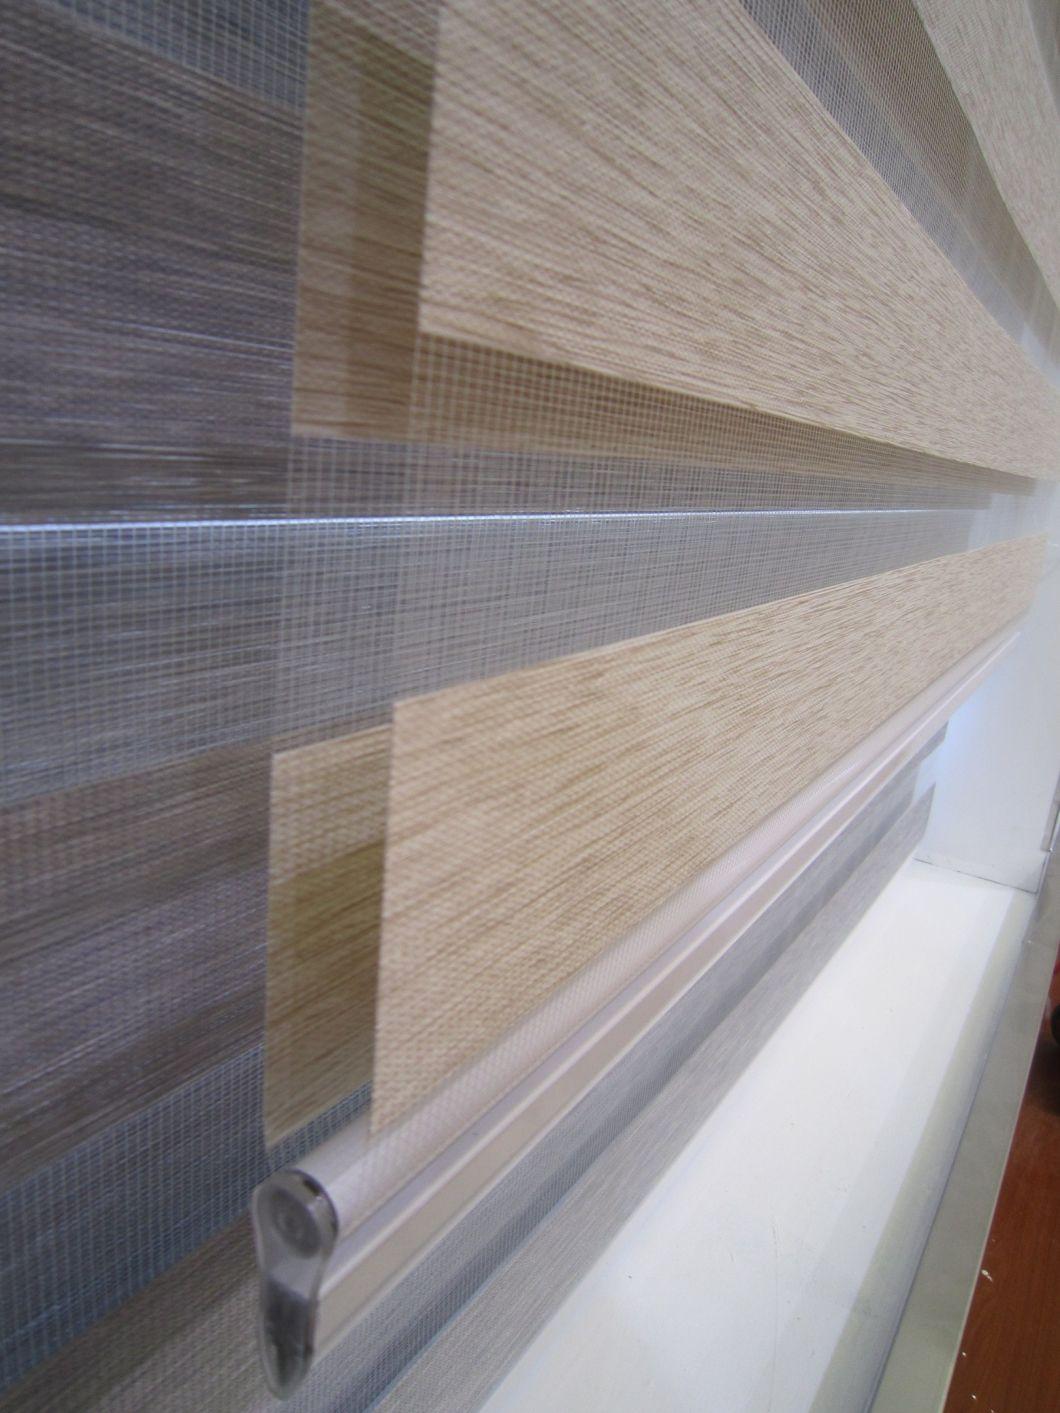 Zebra Blinds/Day Night Roller Blinds/Double Roller Blinds/Home Window Decorate Waterproof Window Blackout Roller Blinds/PVC Coated Blinds/White Coating Shade